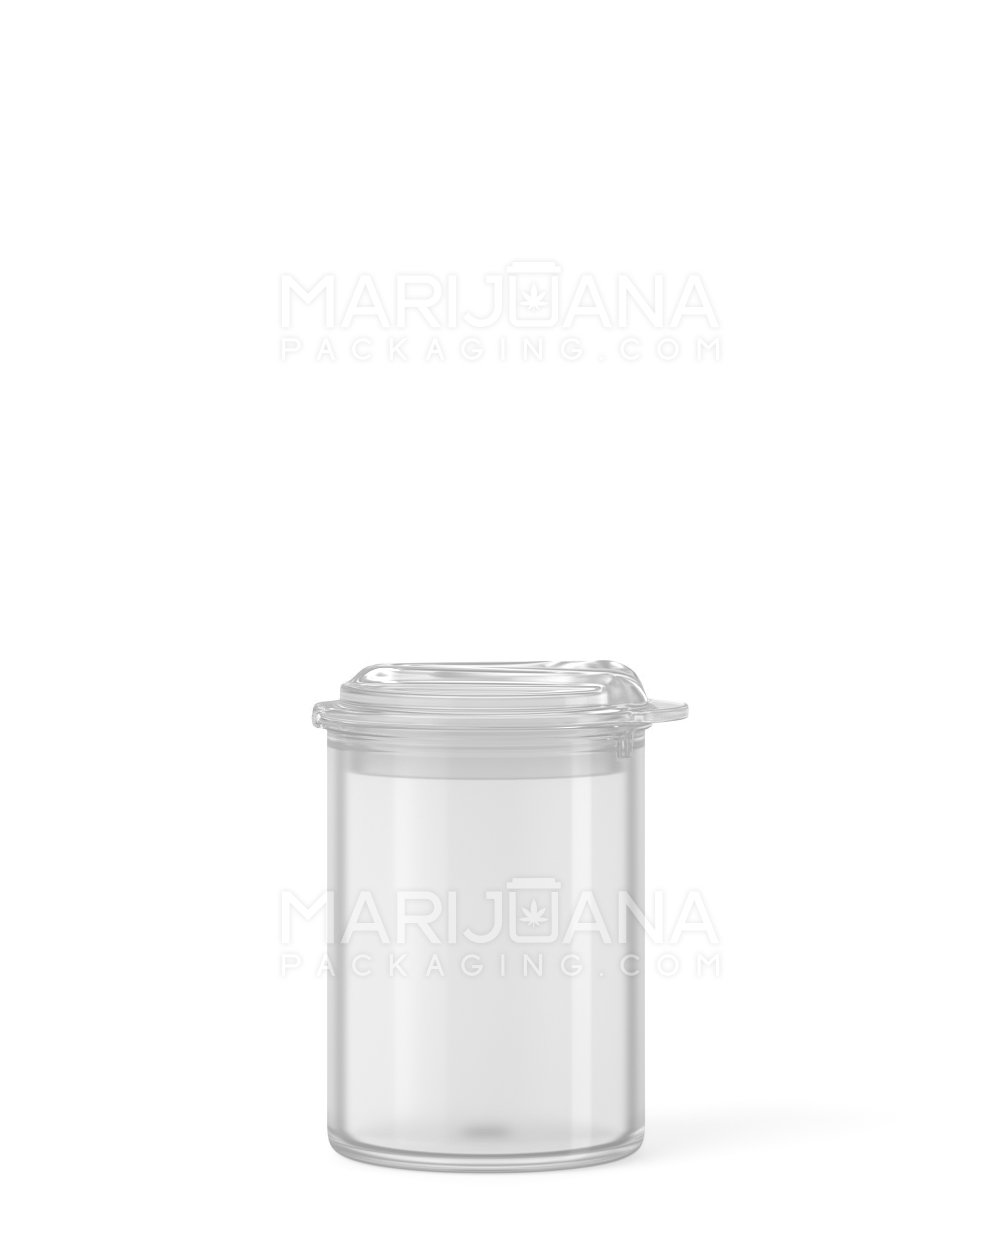 Pop Top Concentrate Containers | 5mL - Clear - 100 Count - 2